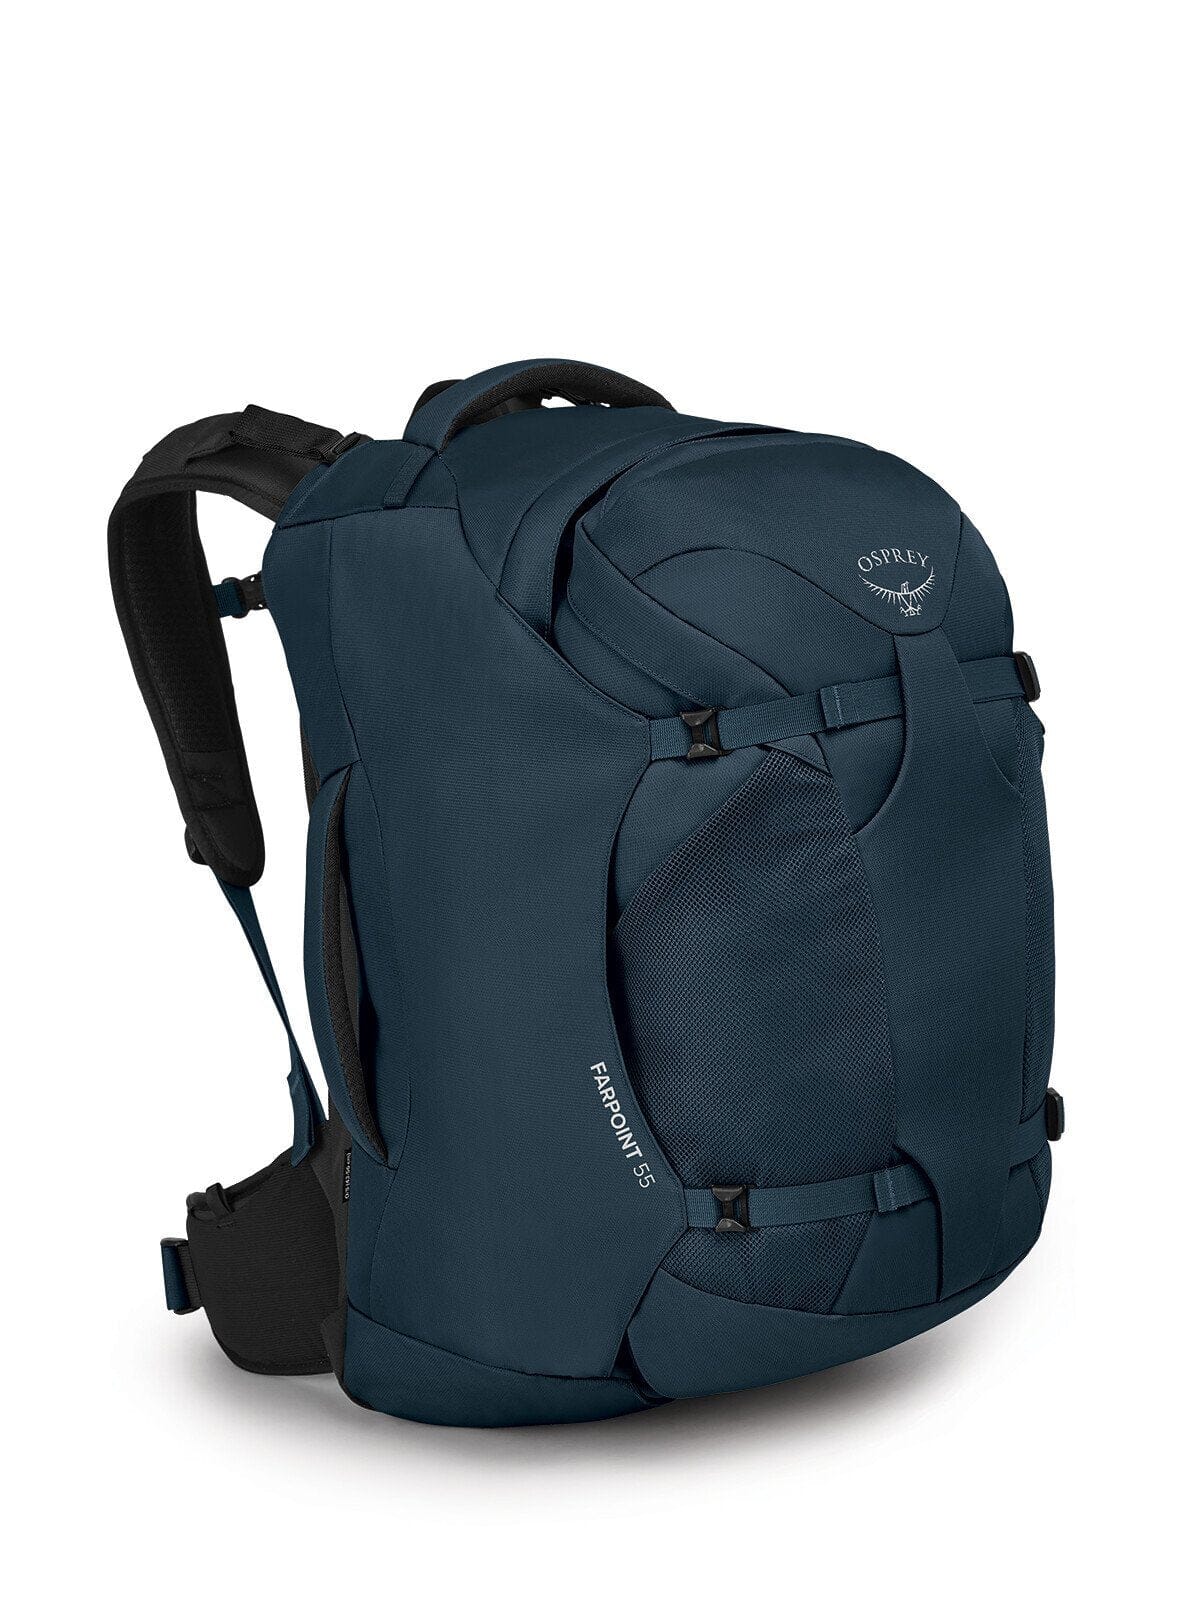 Osprey Farpoint 55 Travel Pack Muted Space Blue 